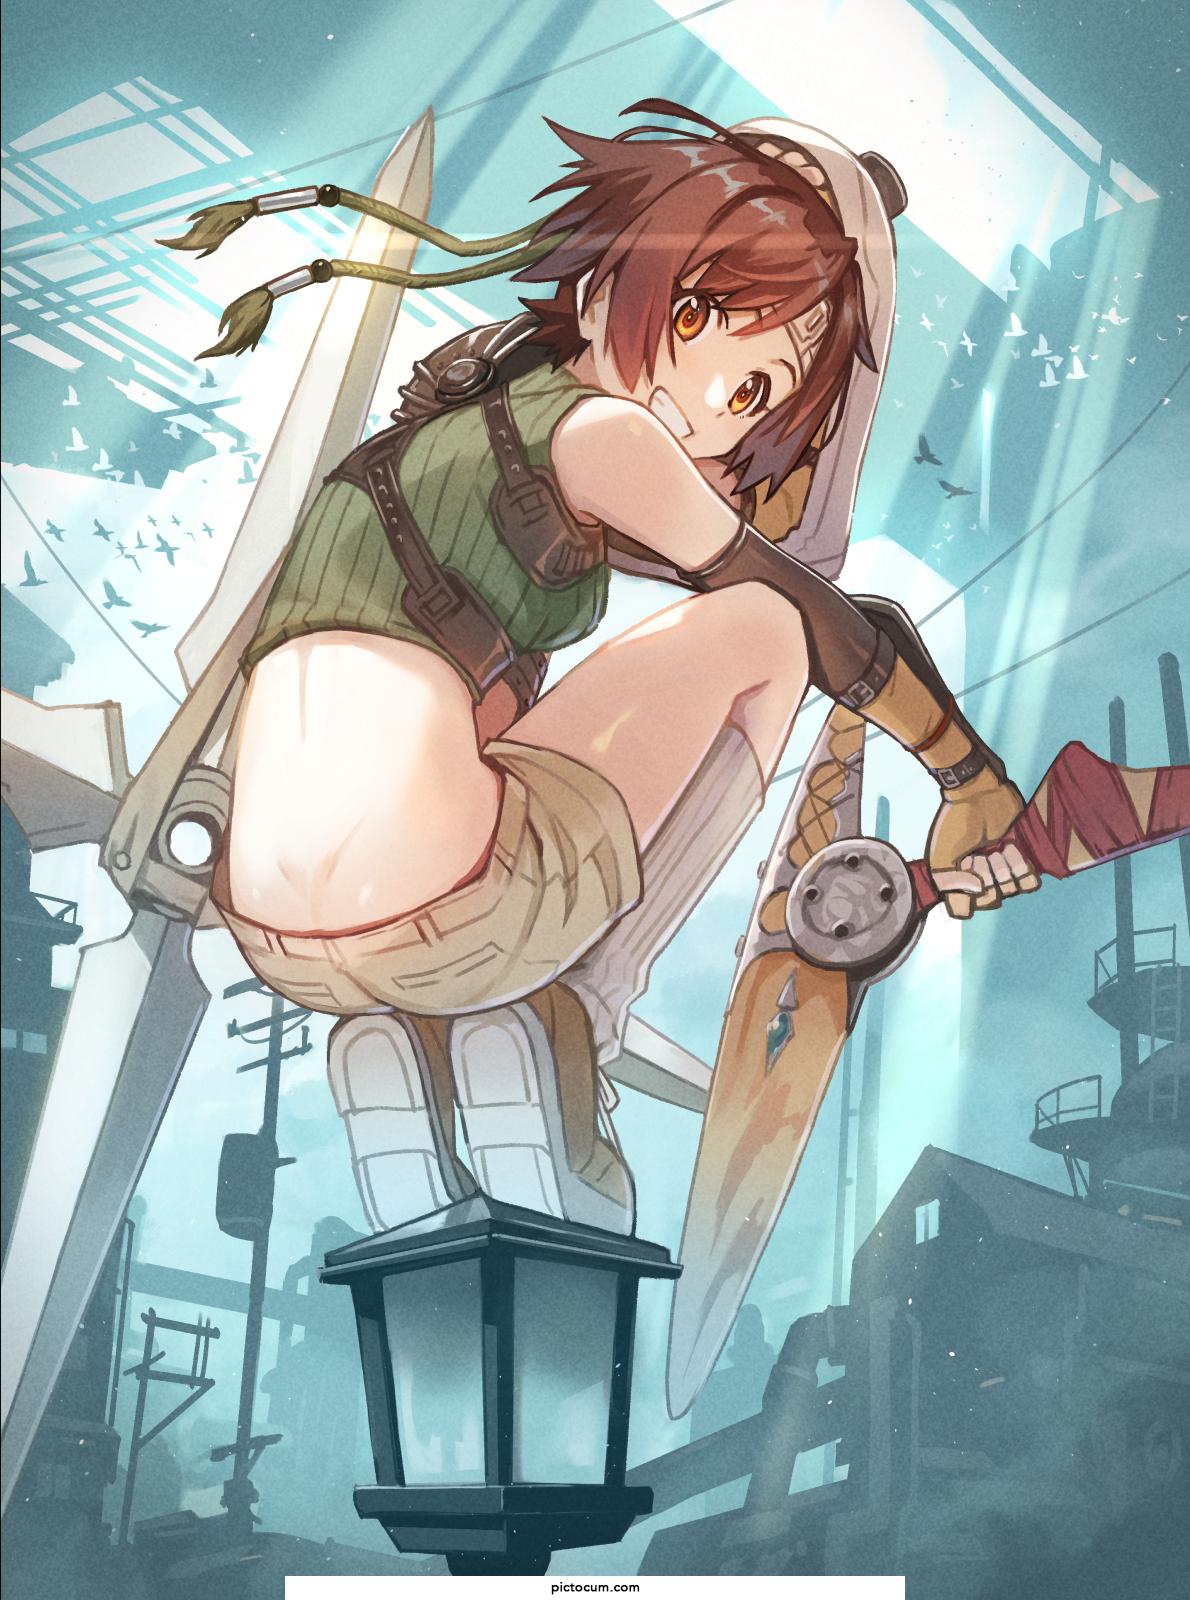 Yuffie Perched on a Lamppost